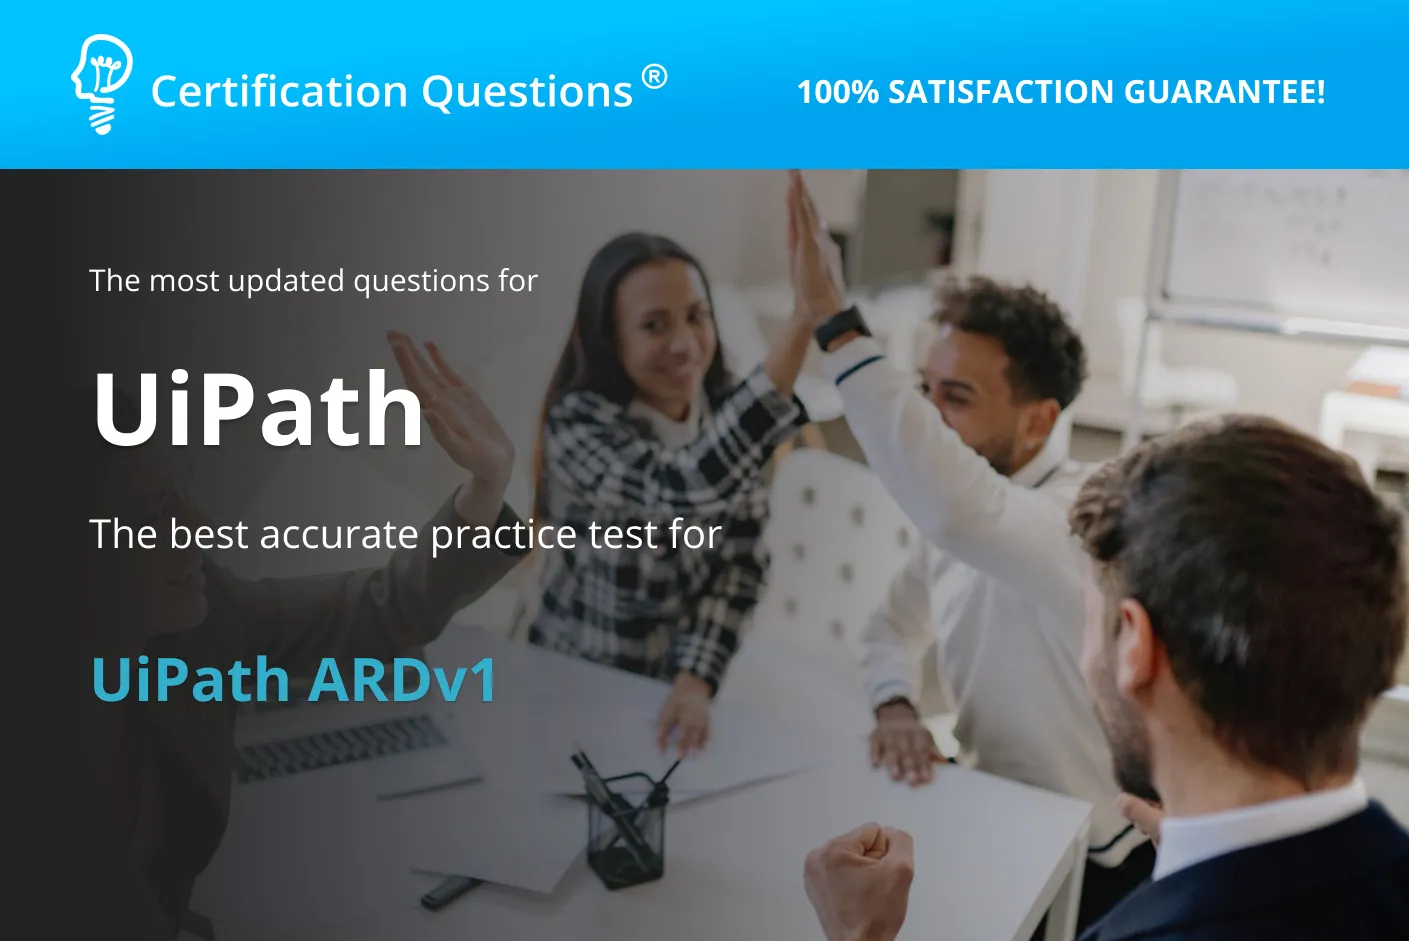 This image represents the Uipath Associate Certification Questions